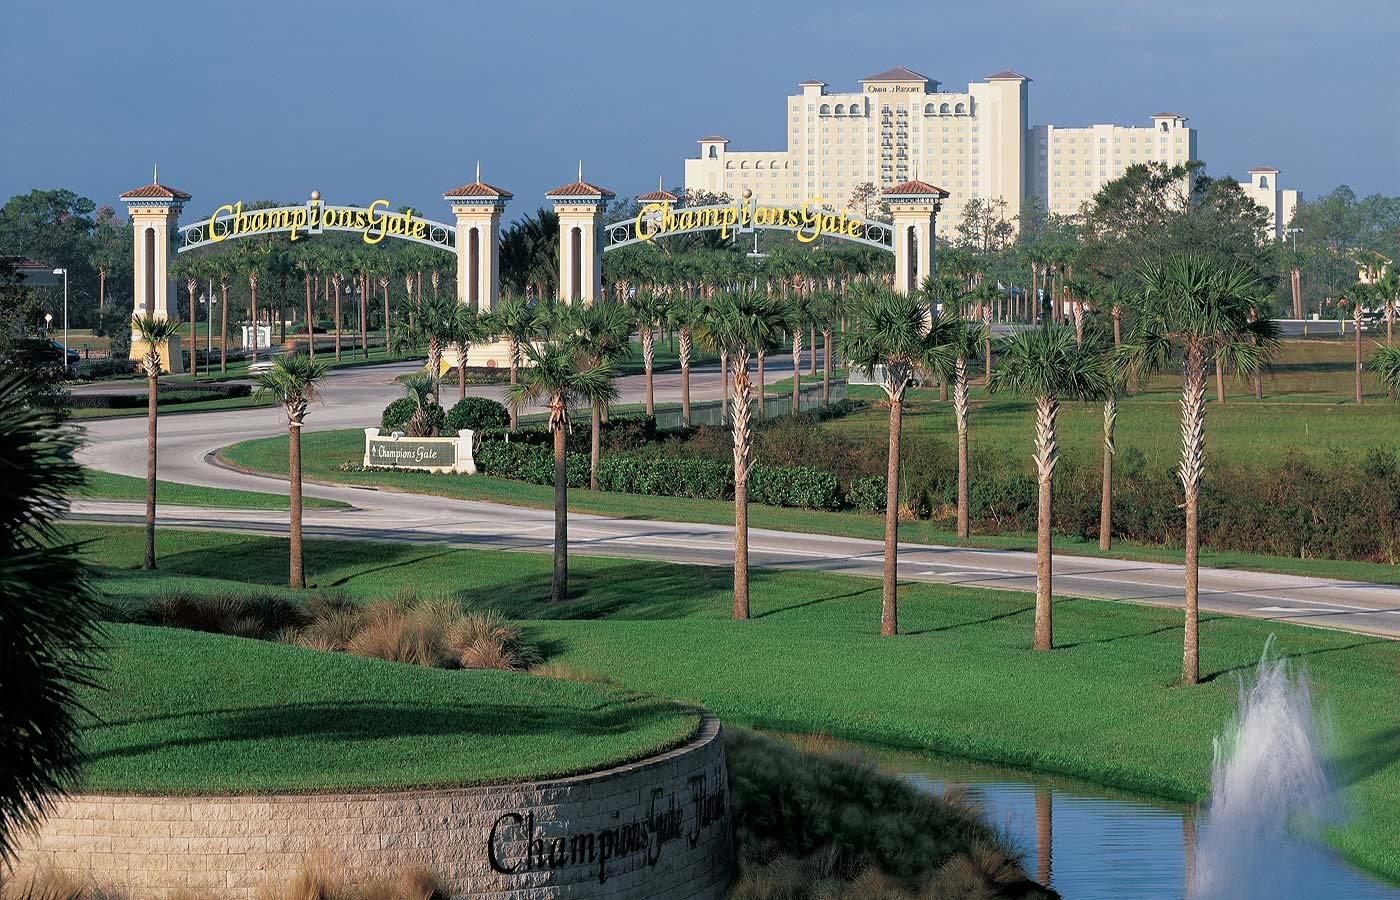 championsgate entrance with arch and hotel